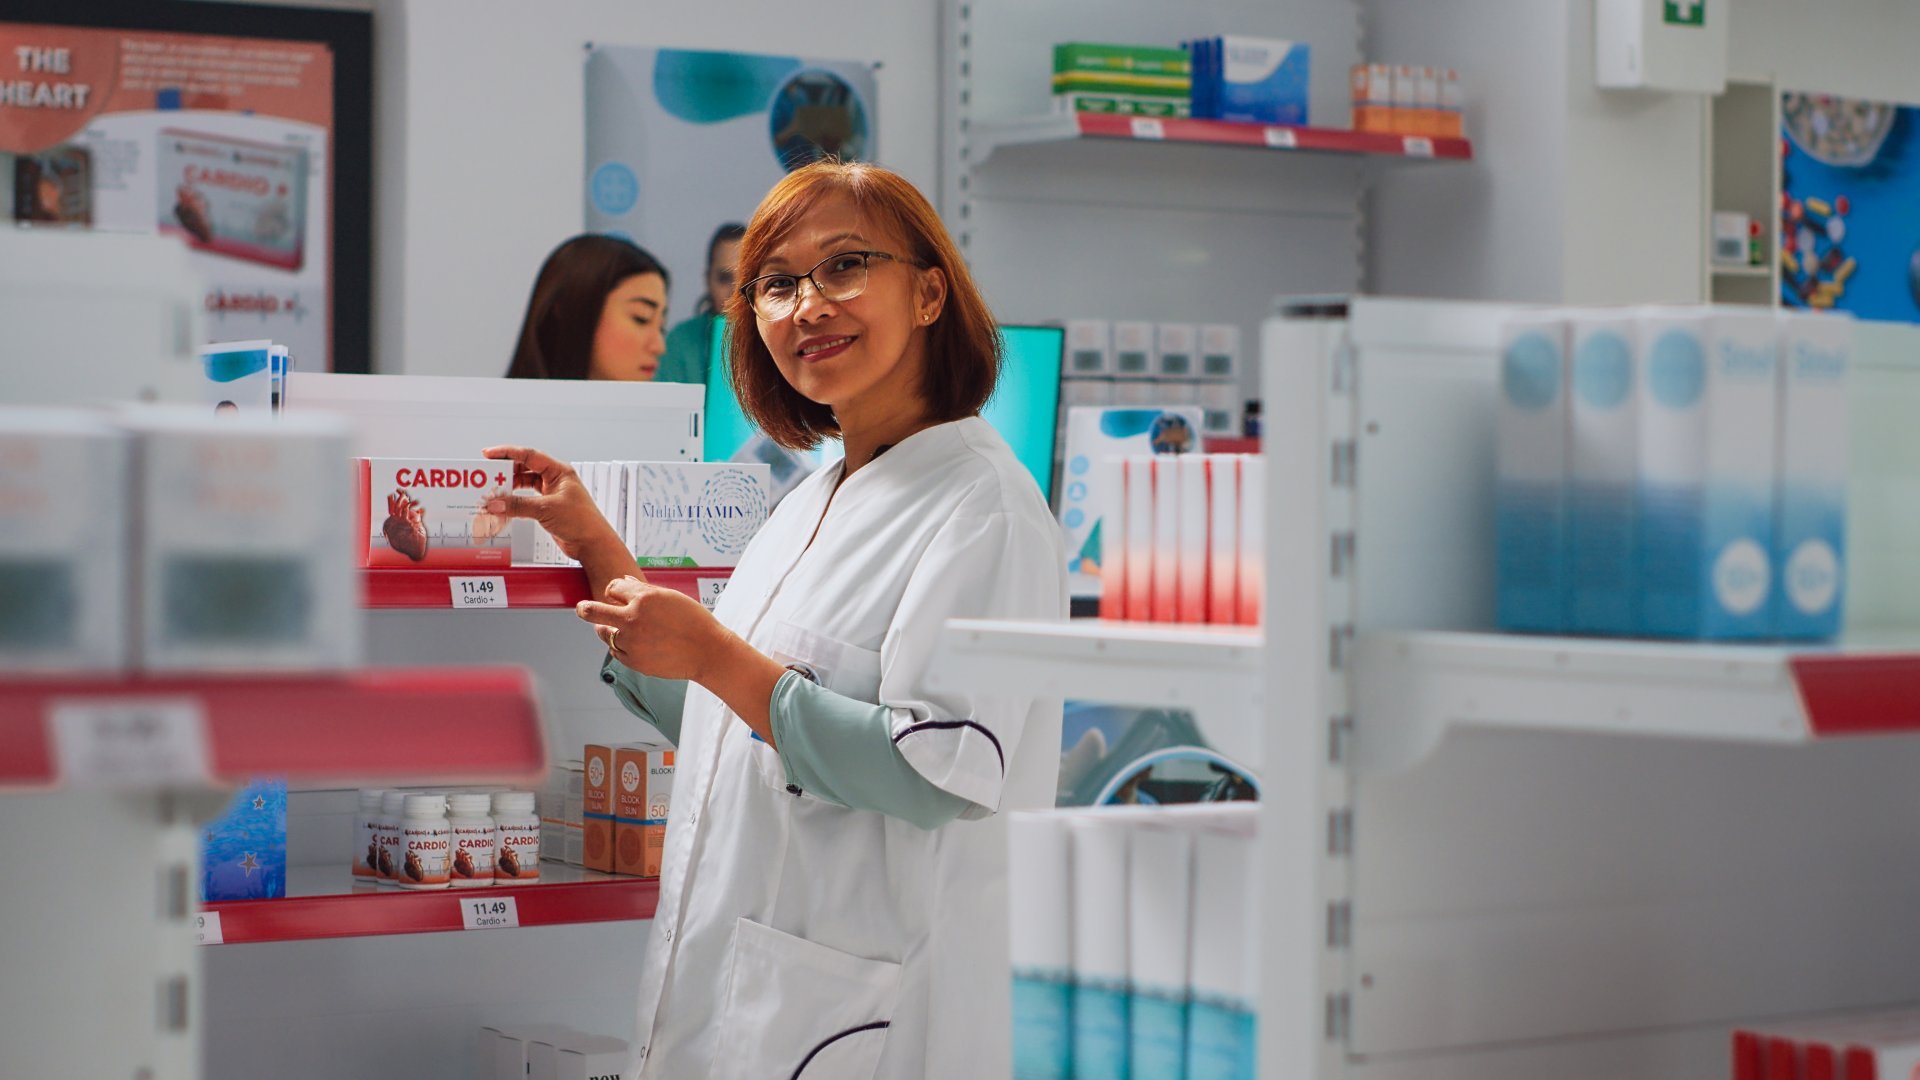 A female pharmacy worker arranges medical products on a shelf in her workplace.